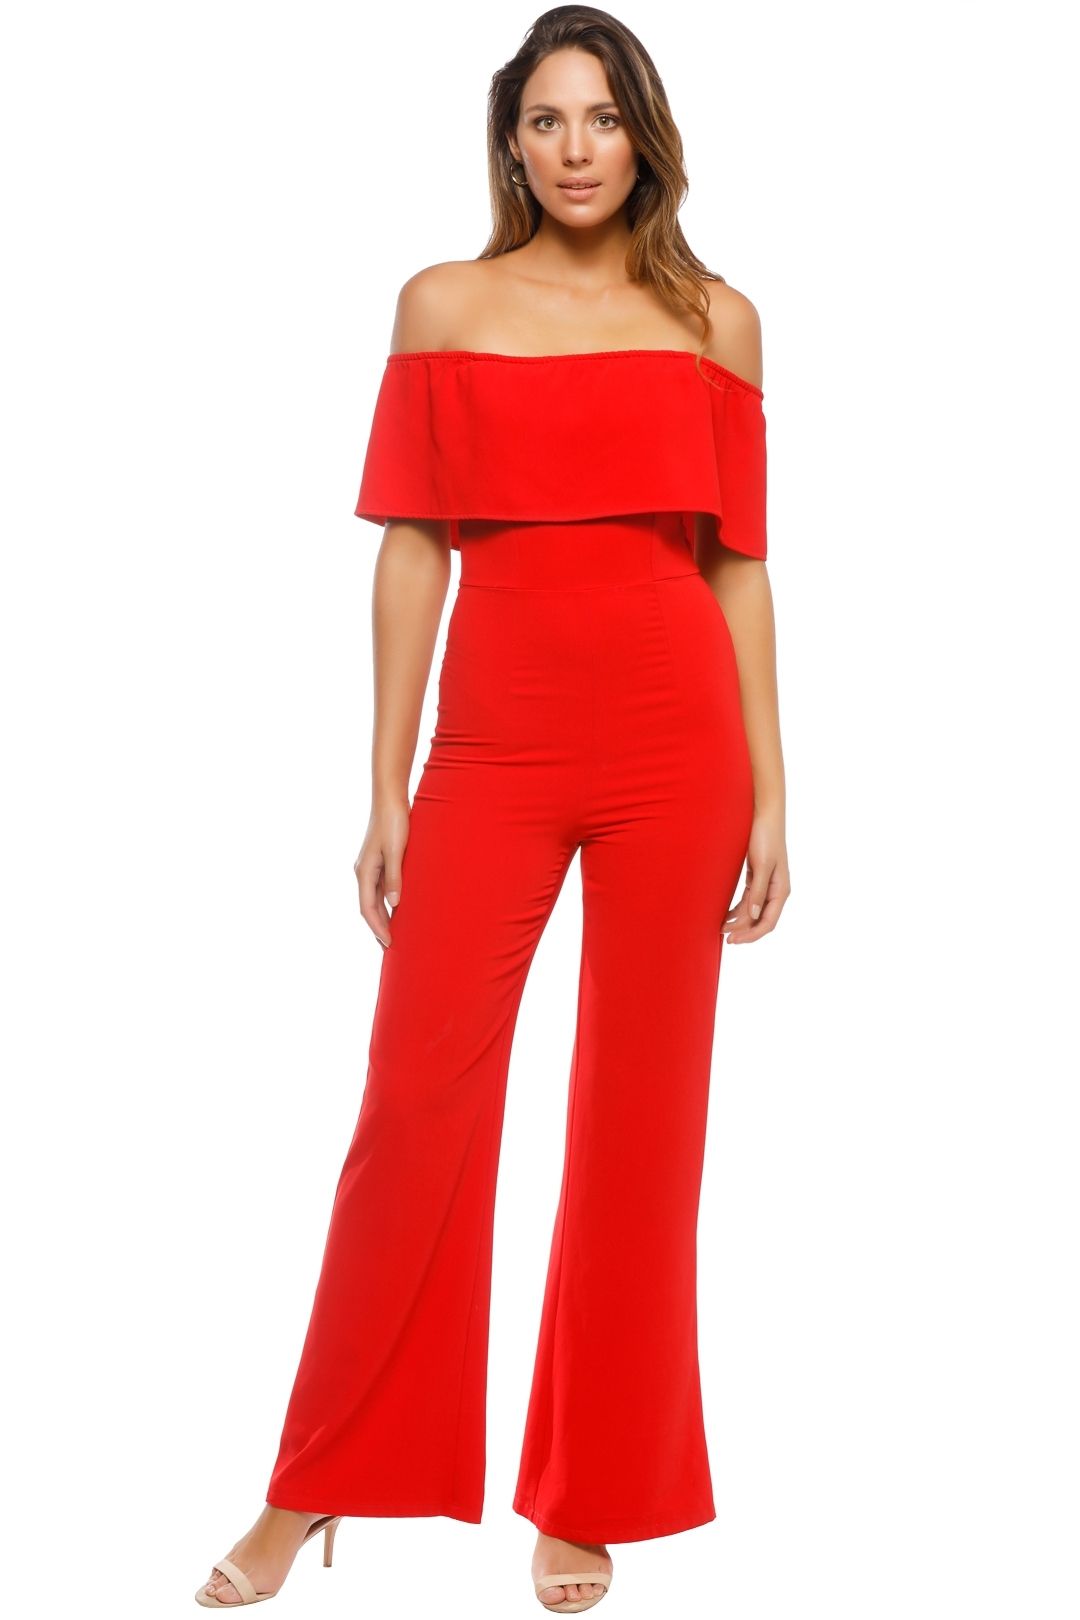 Mossman - The Blank Stare Jumpsuit - Red - Front